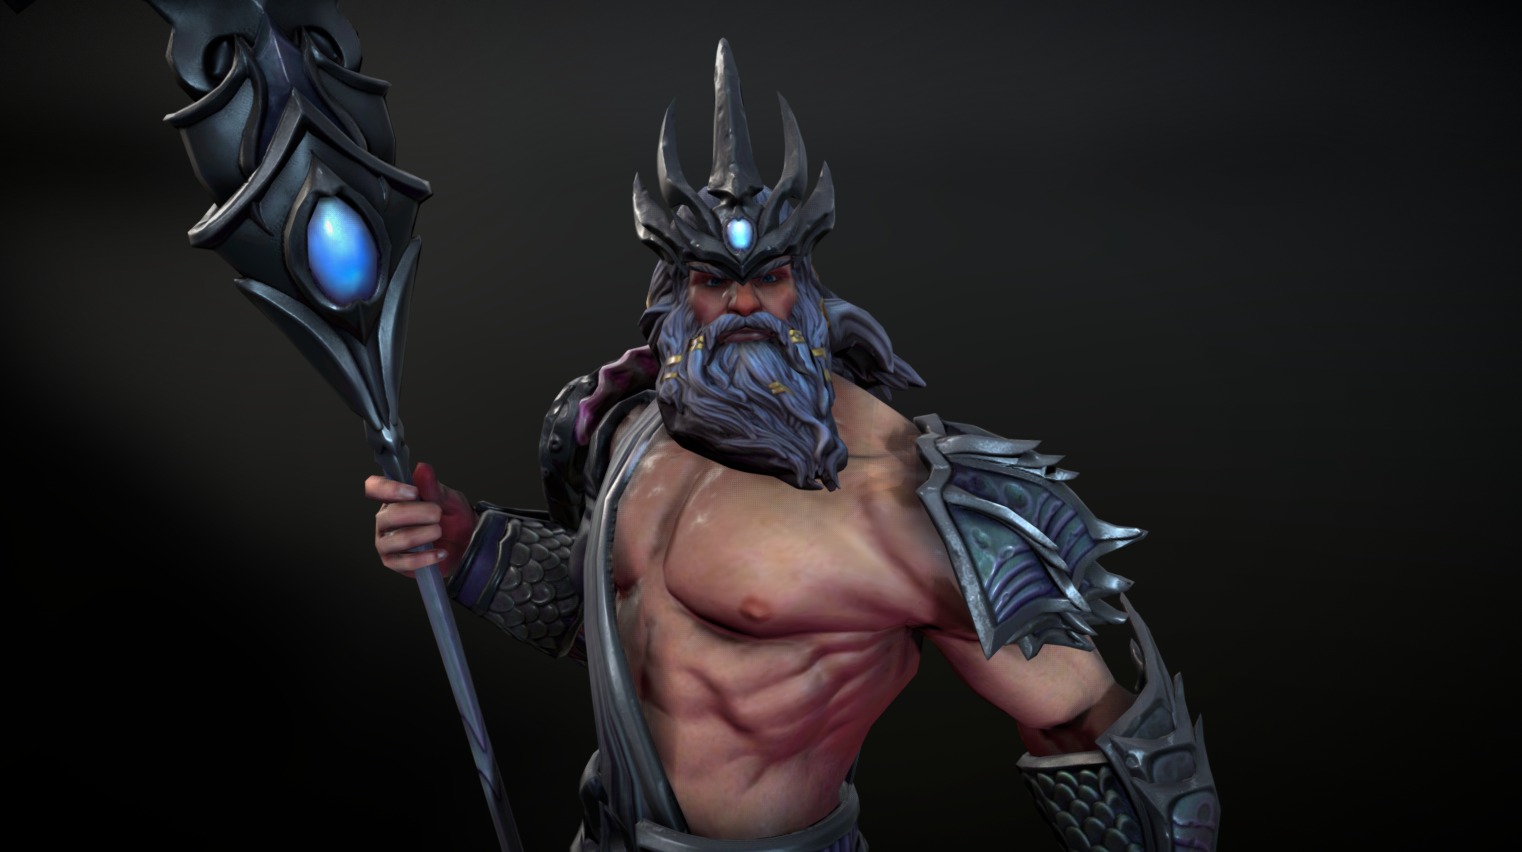 At Hi-Rez, we decided to give ol' Poseidon a make-over.  It was time&ndash; as he was one of the first Gods of the original release of SMITE.  I was very fortunate to get to work on this skin.  He was passed around to other artists in the pipeline to make sure he fit to the Old version's rig.  My main job was to retopologize, texture and get his new body mesh into Unreal 3.  I was, however, able to clean up the sculpt and finalize it for texture generation.  Base-meshed in Max, Sculpted in Zbrush, Textured in Substance Painter 2 and Photoshop.  Thanks for taking a moment to check him out.

Base Mesh and adjustments to rig by Ben Knapp

Sculpt by David Riddle

Sculpt finalization and textures by Miles Wadsworth

Concept by Andy Timm - SMITE: Poseidon - 3D model by Jmiles 3d model